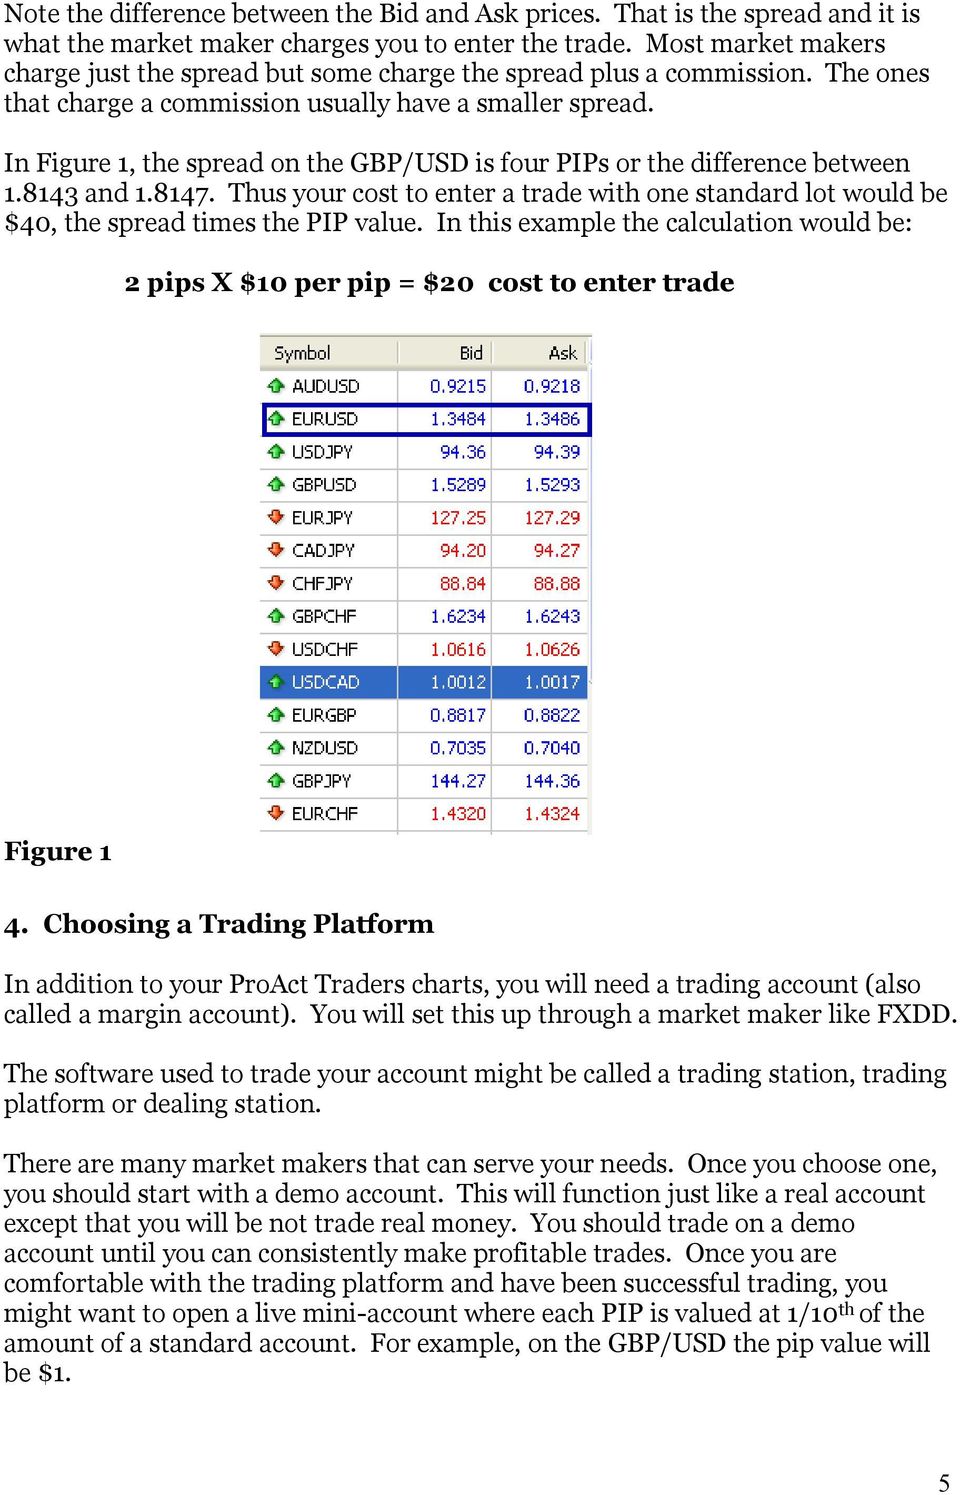 In Figure 1, the spread on the GBP/USD is four PIPs or the difference between 1.8143 and 1.8147. Thus your cost to enter a trade with one standard lot would be $40, the spread times the PIP value.